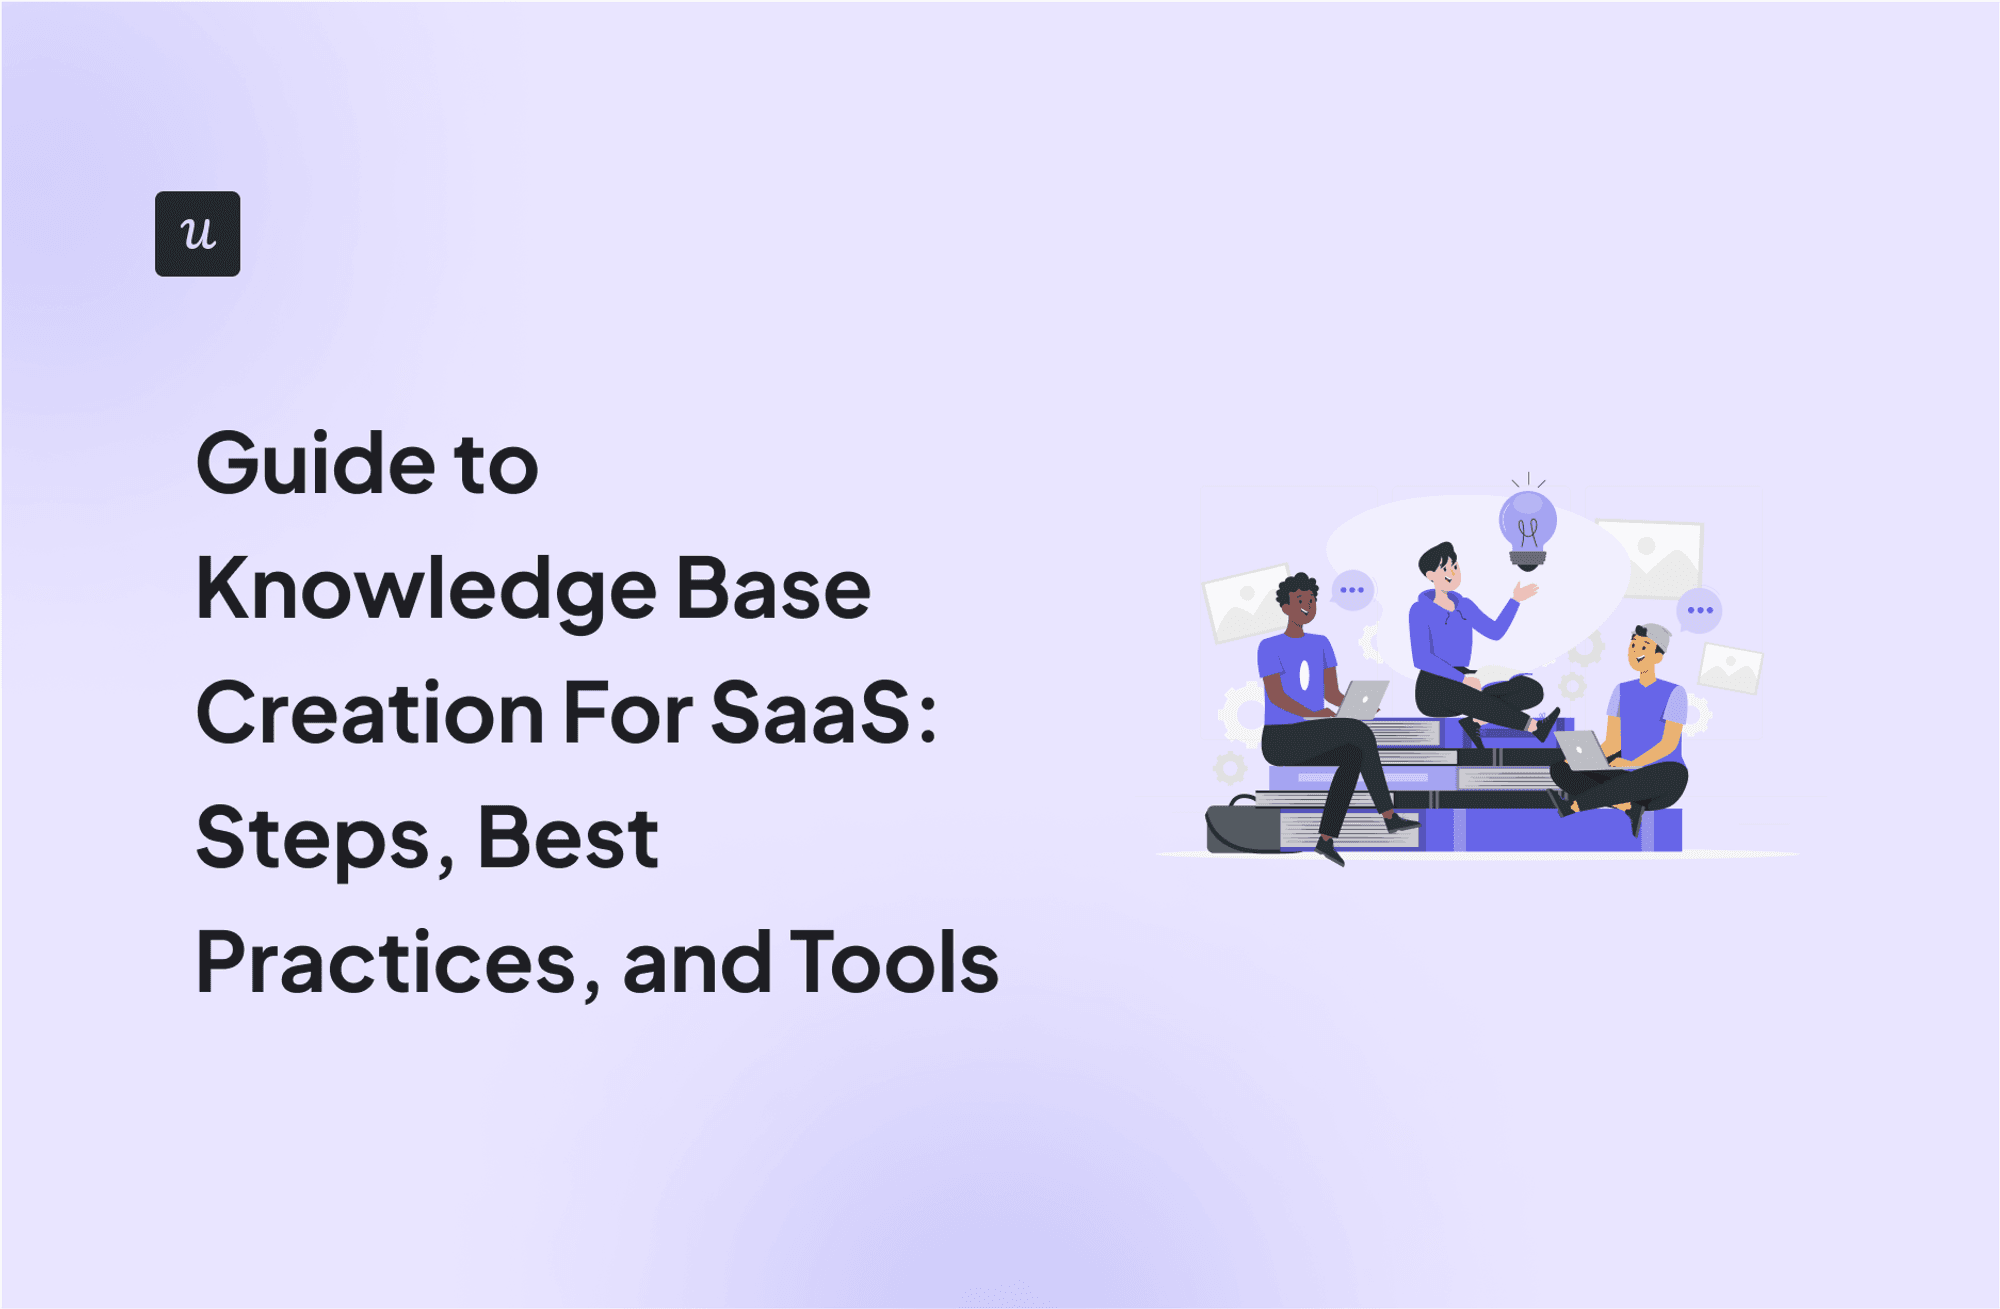 Guide to Knowledge Base Creation For SaaS: Steps, Best Practices, and Tools cover